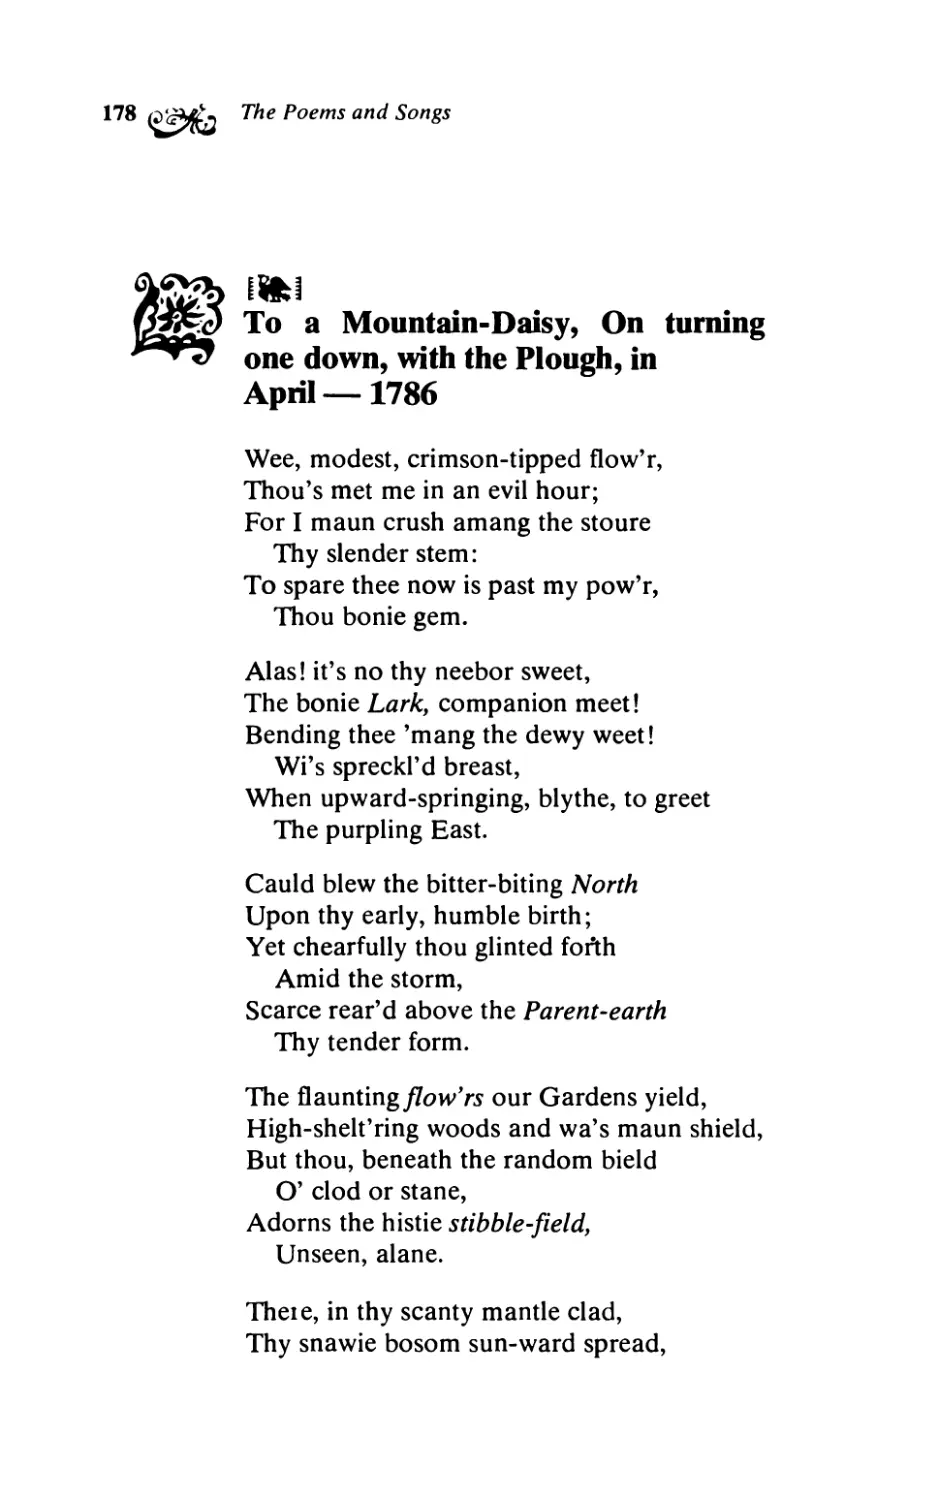 То a Mountain-Daisy, On turning one down, with the Plough, in April-1786